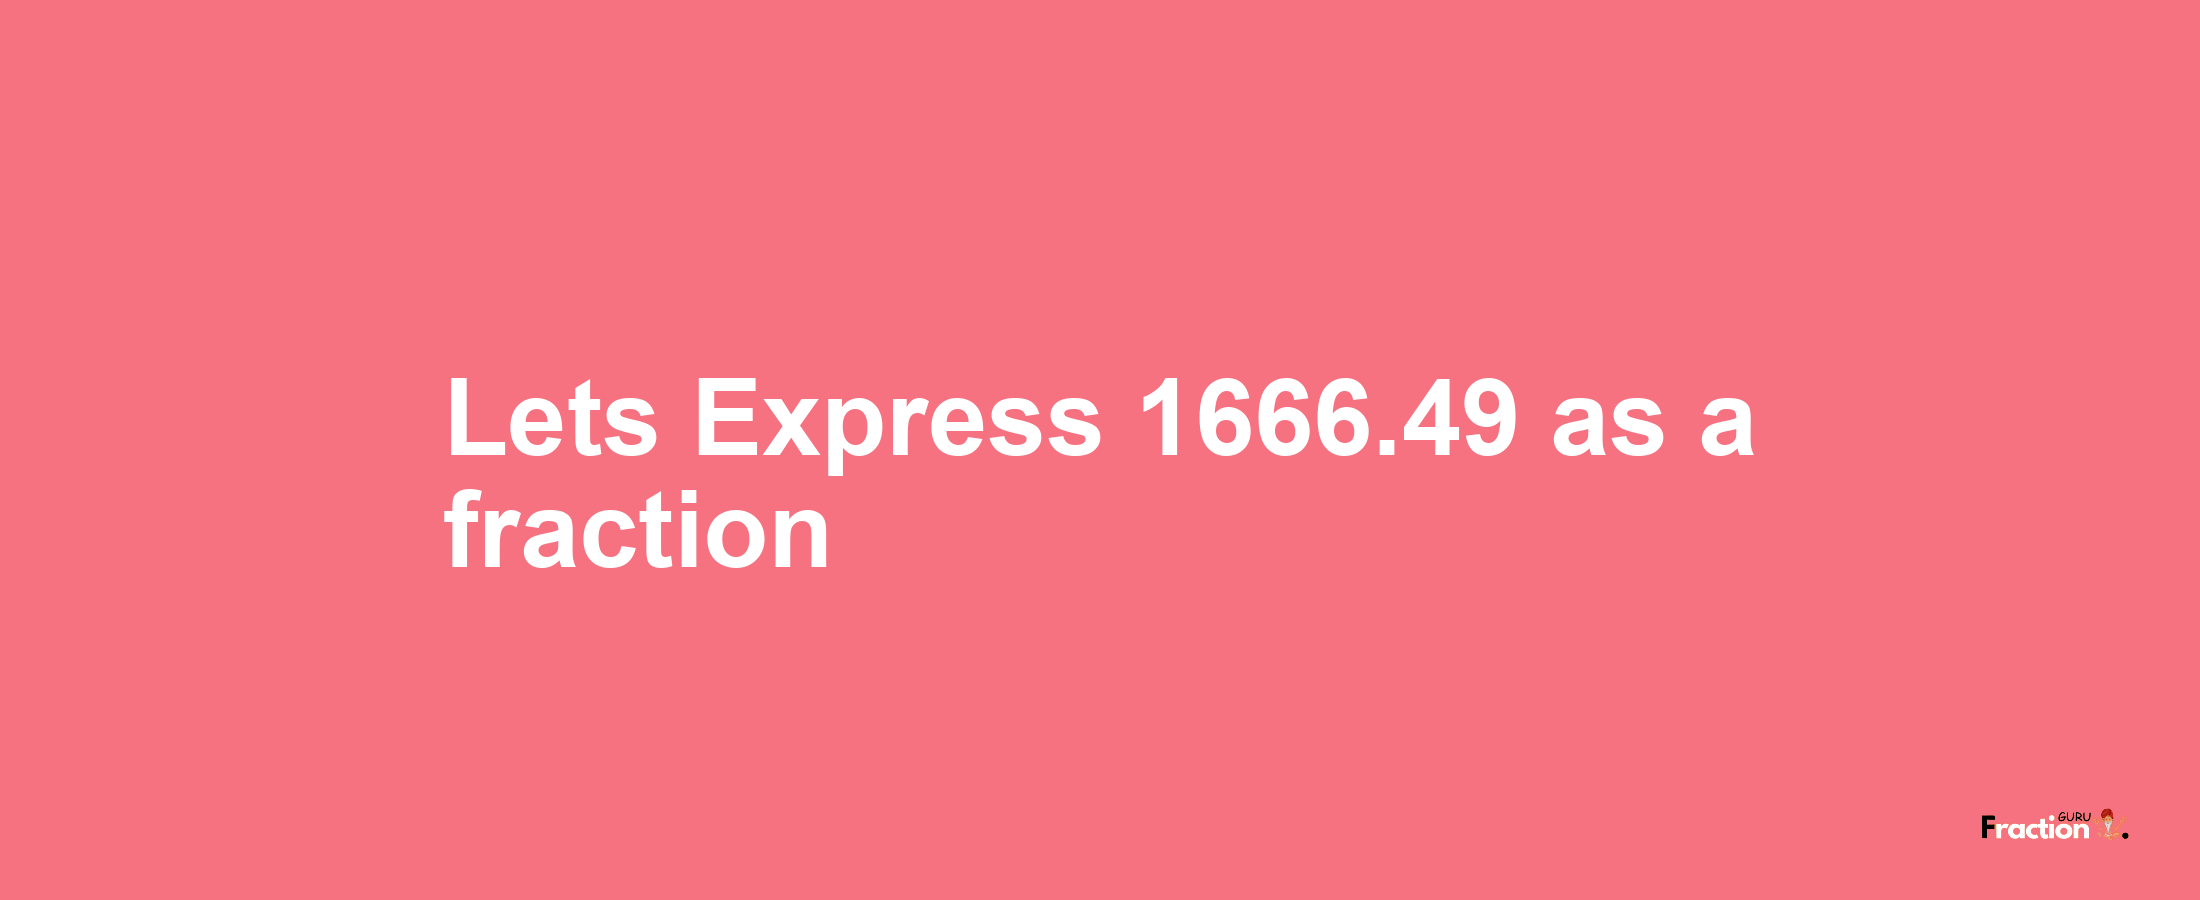 Lets Express 1666.49 as afraction